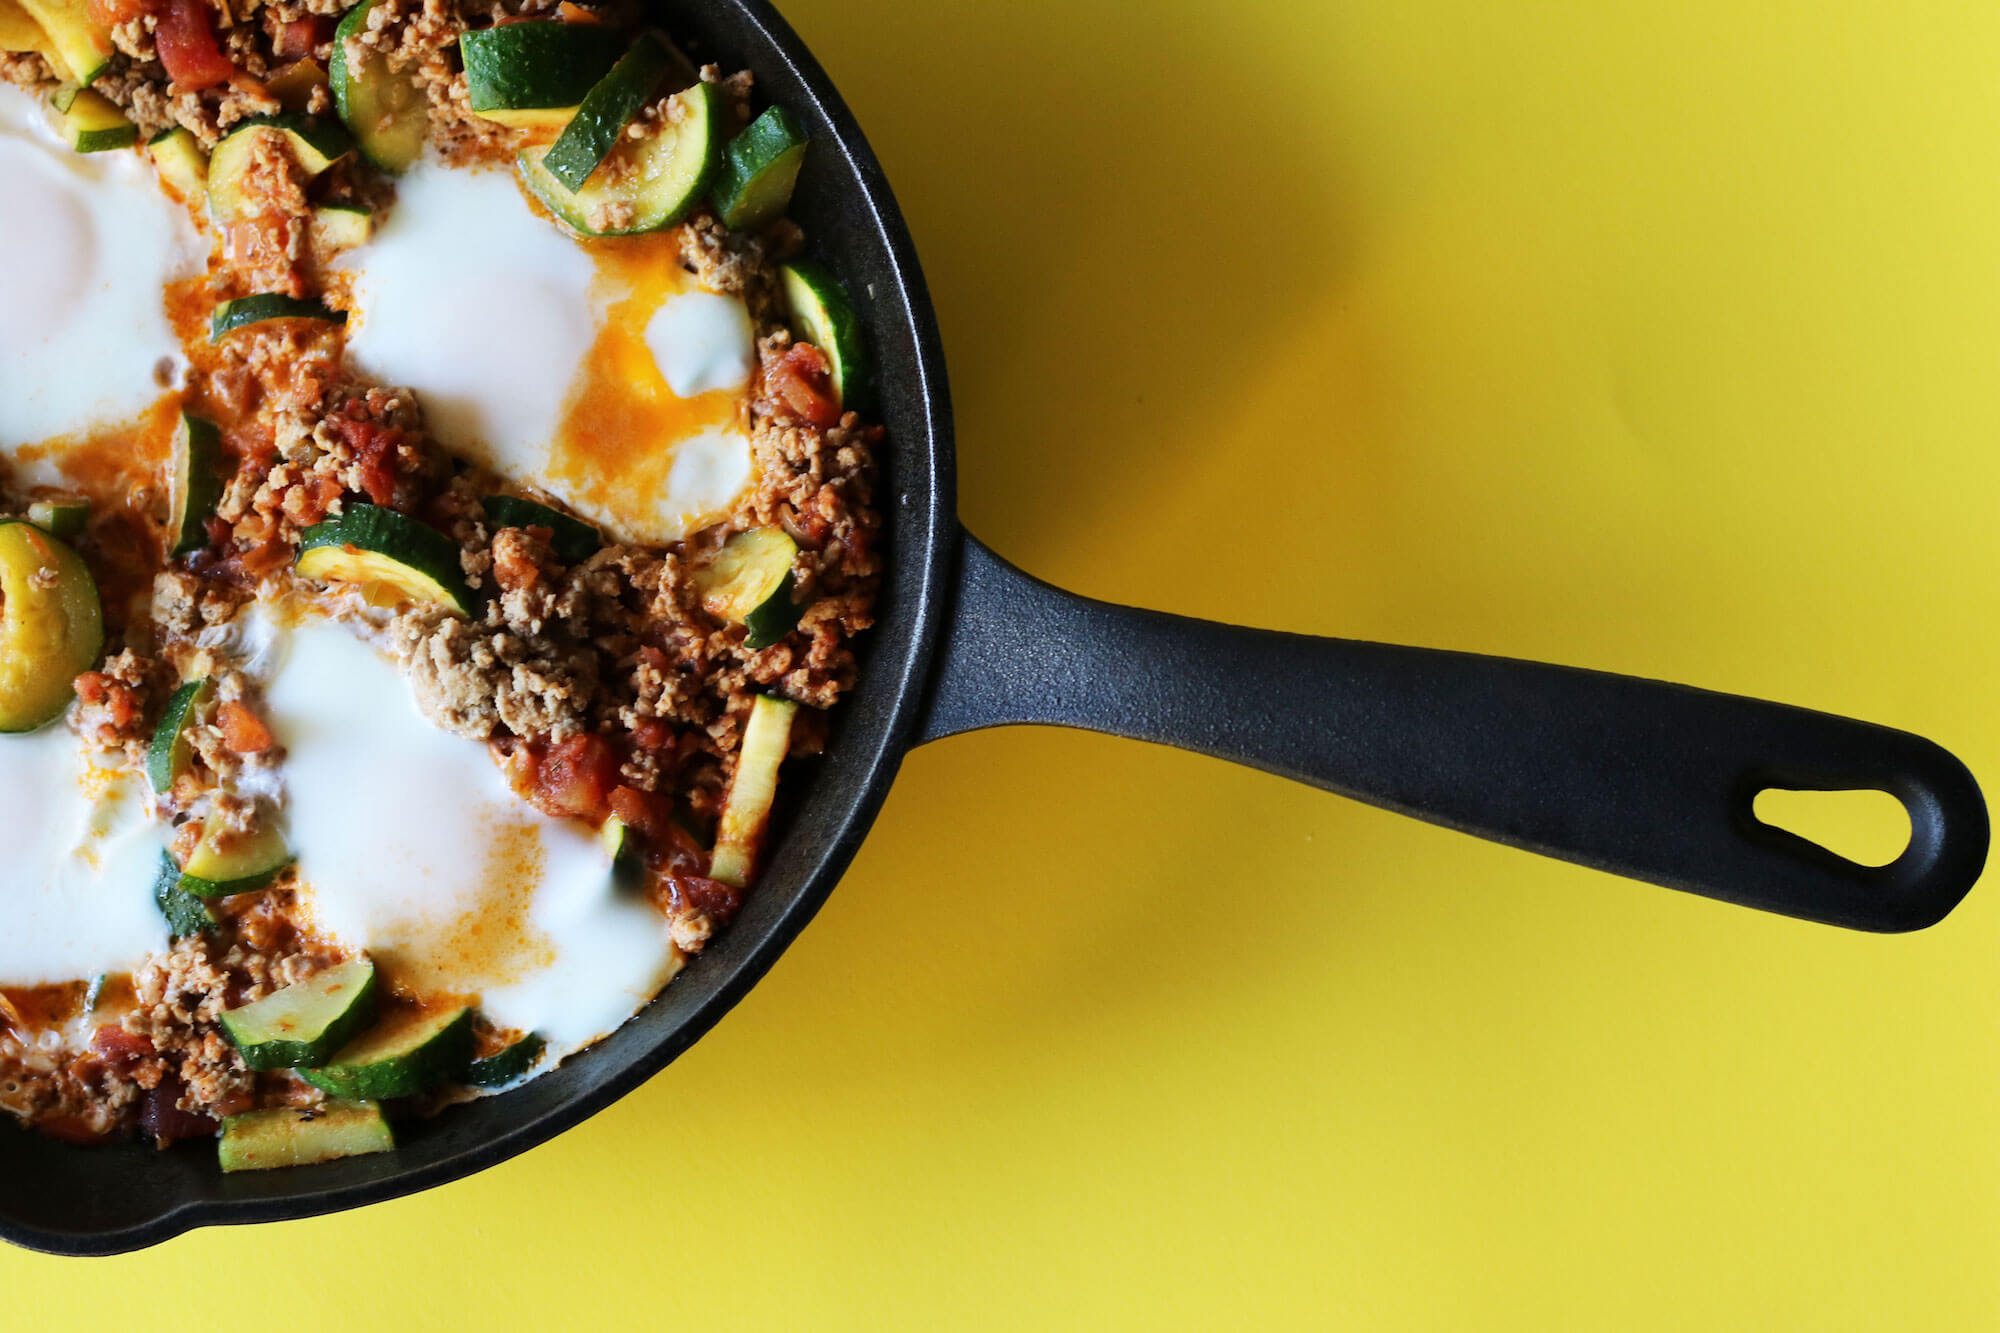 21 One Pan Meal Ideas Your Clients Will Love: Zucchini Turkey Breakfast Skillet